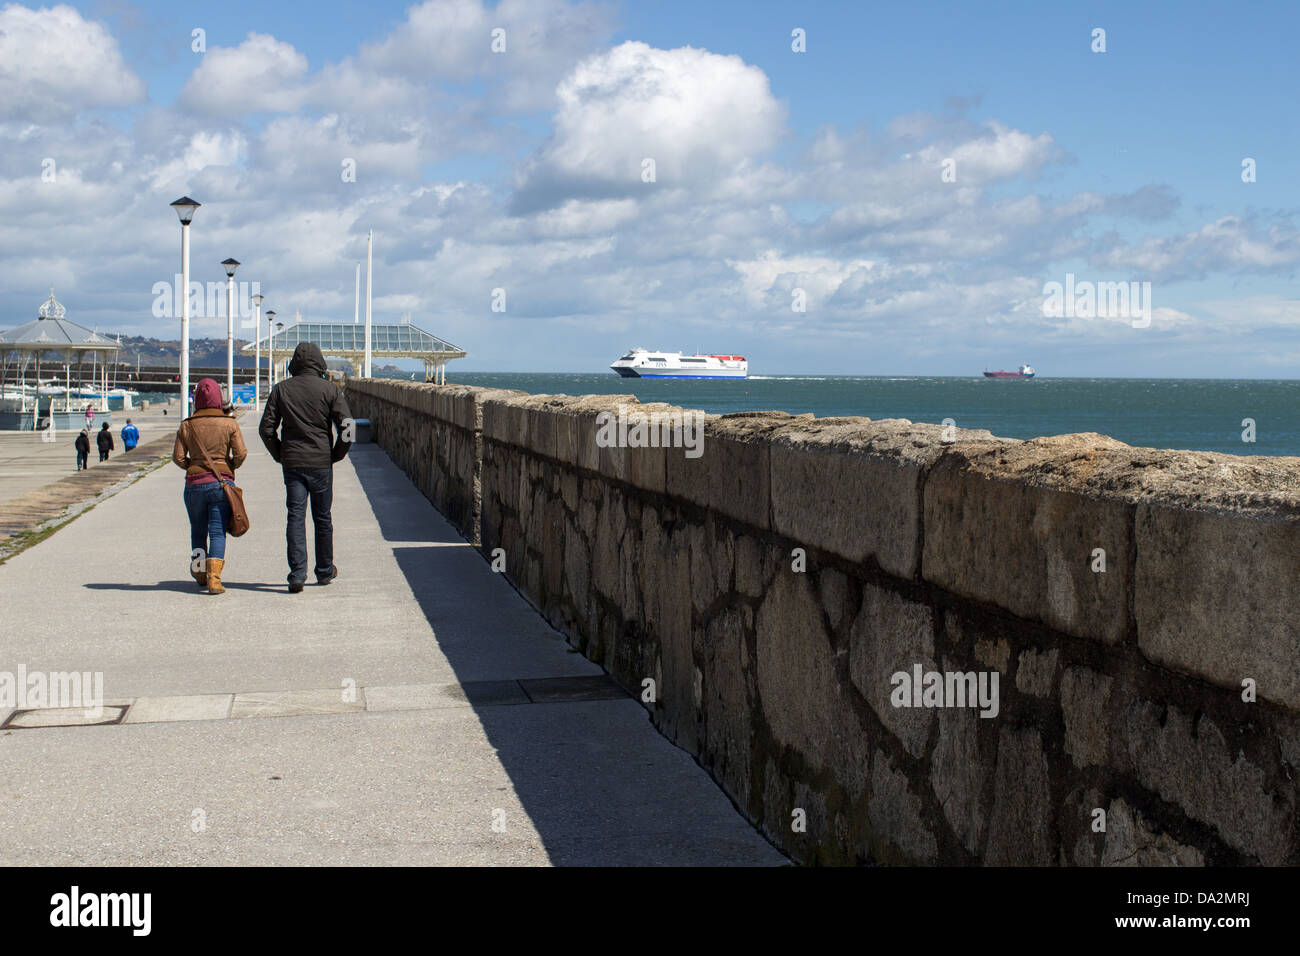 People walking on a promenade with a ferry in the background. Stock Photo